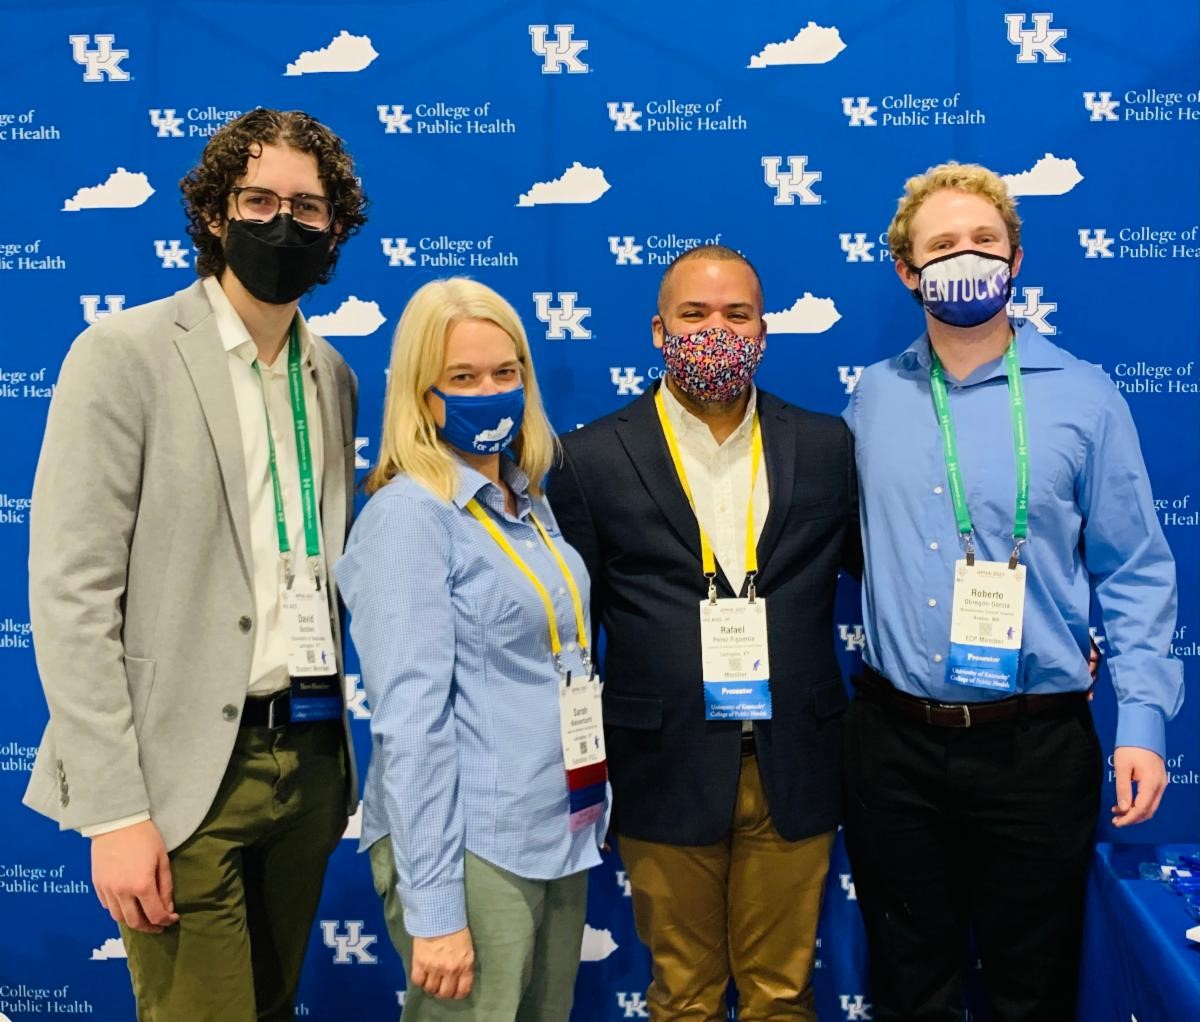 Group of UK faculty and students standing in front of blue backdrop